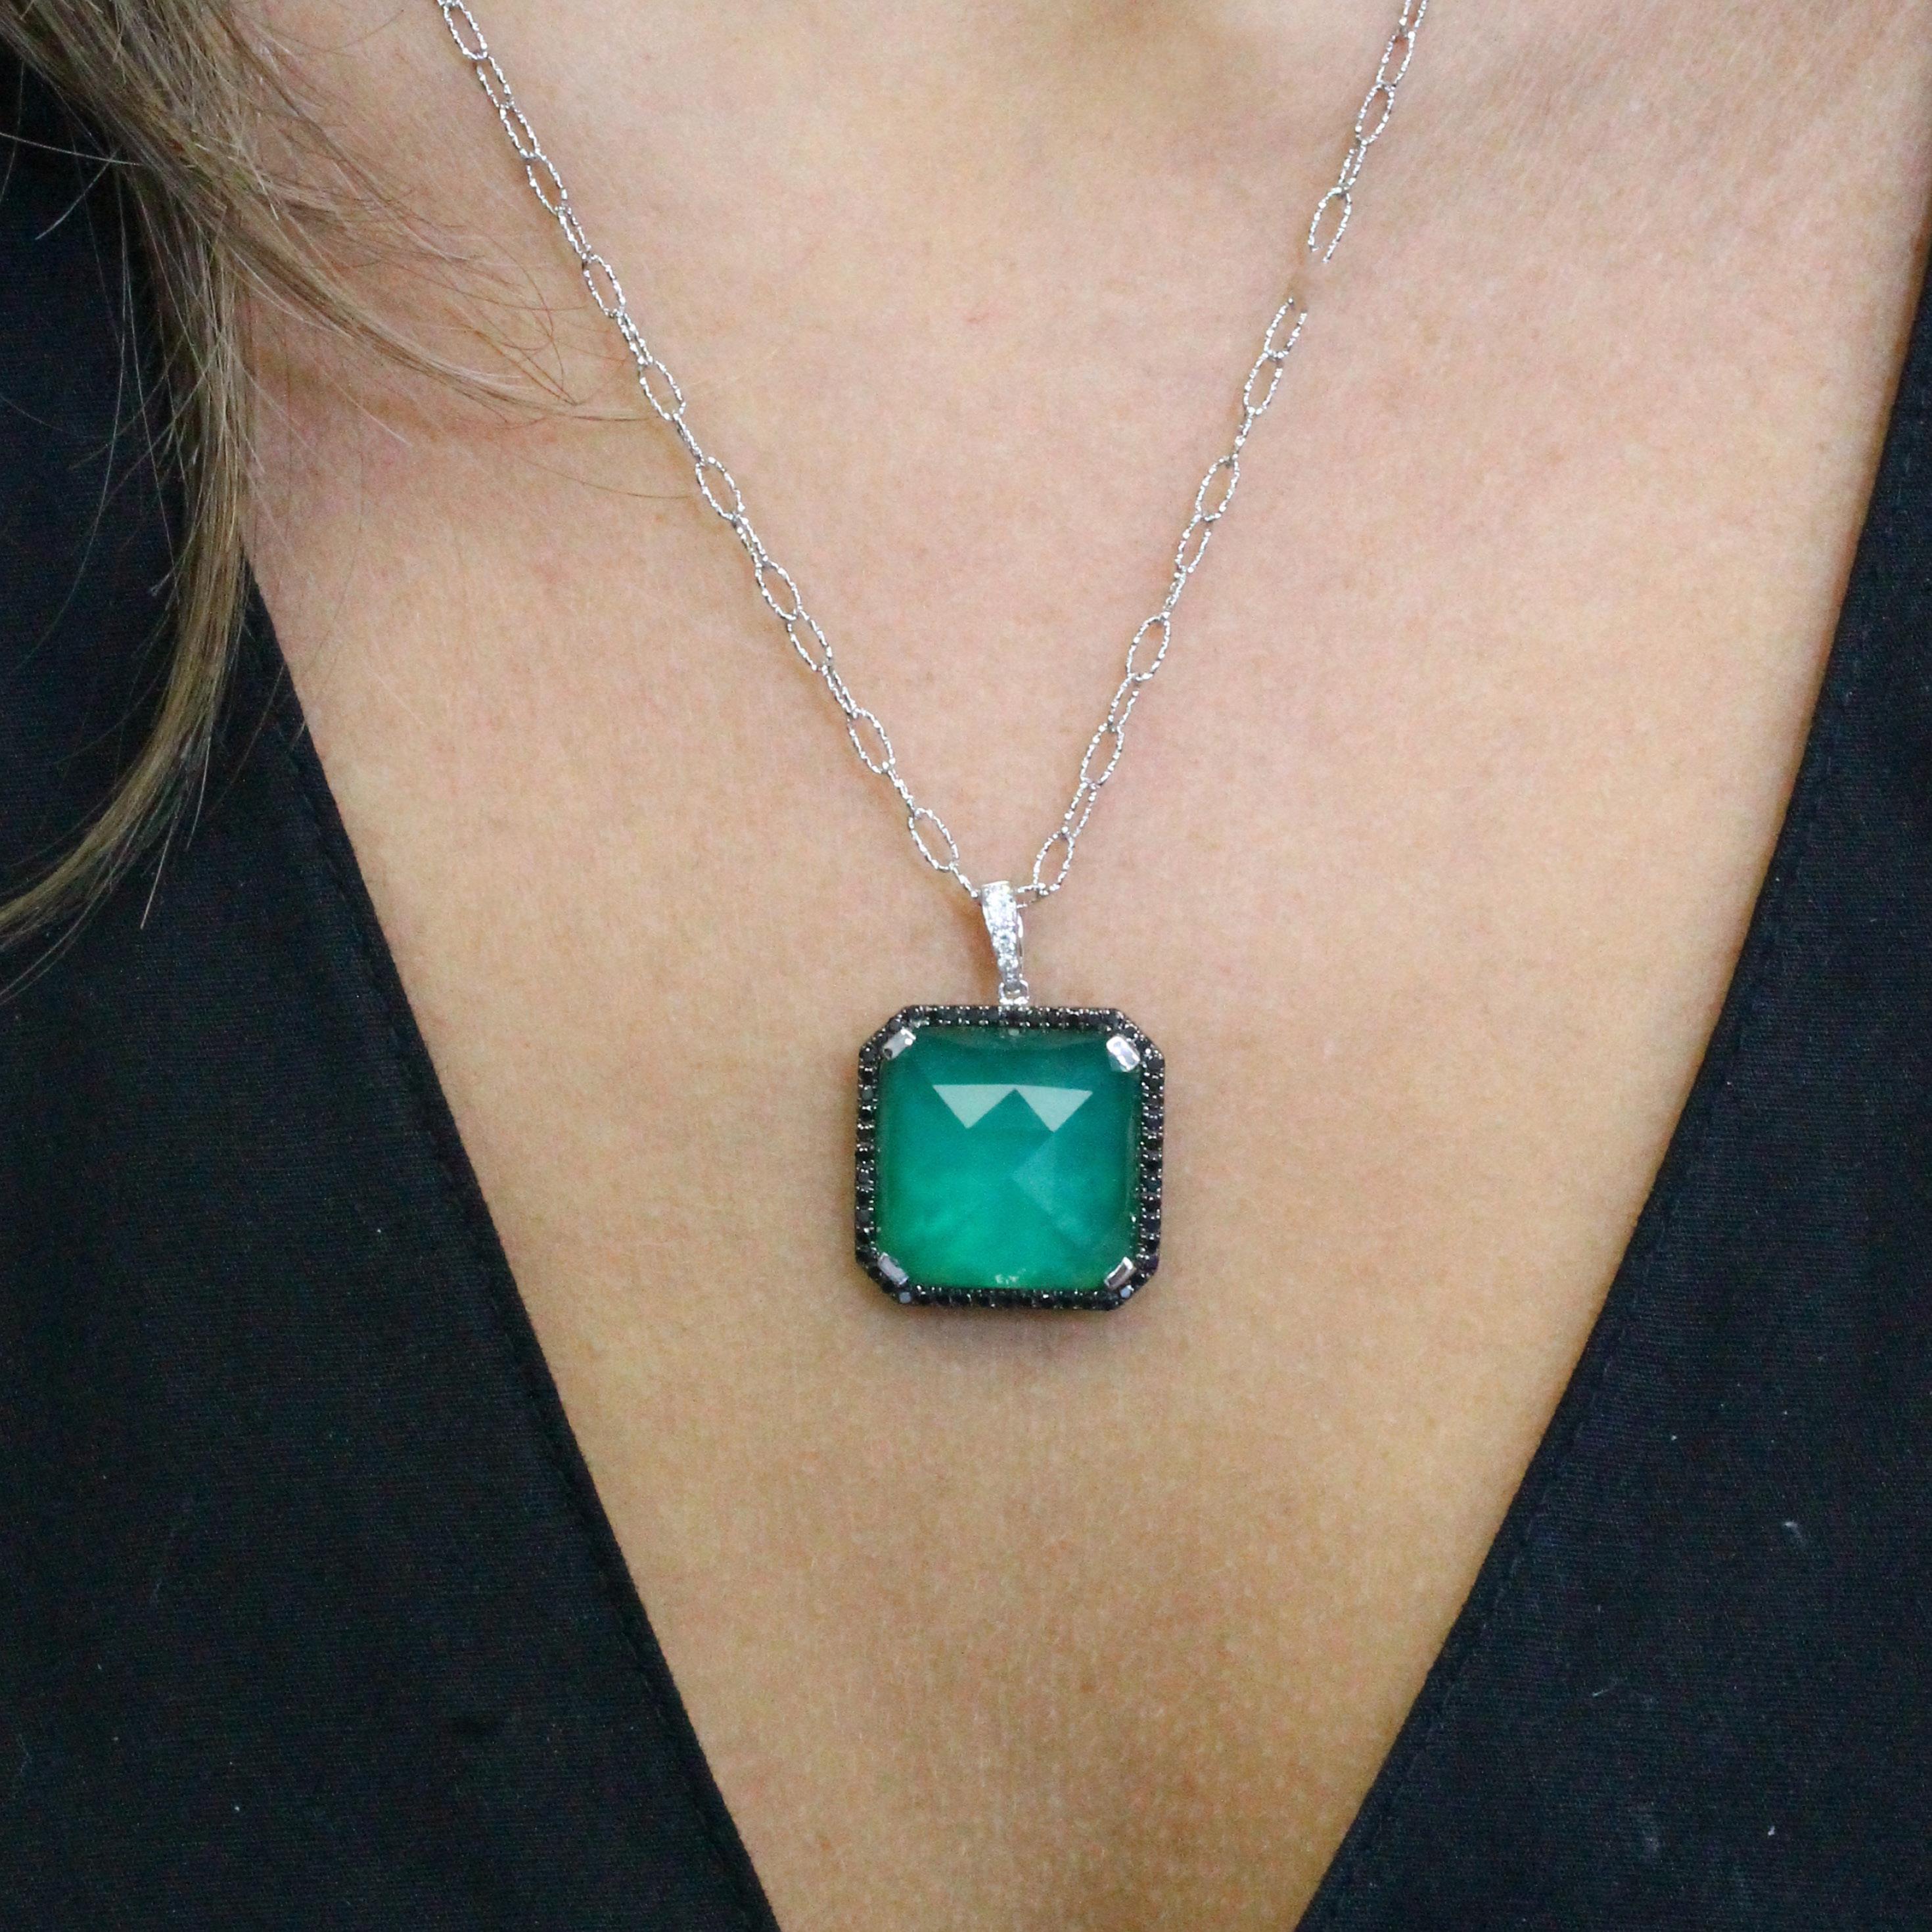 One-of-a-kind Pendant featuring Cushion Checker-Cut White Topaz layered with Green Agate, set in 18 Karat White Gold. Black Diamonds Surround the center stone. Hangs from an 18K 18-inch Italian Handmade Textured Link Chain. Doves master artisans